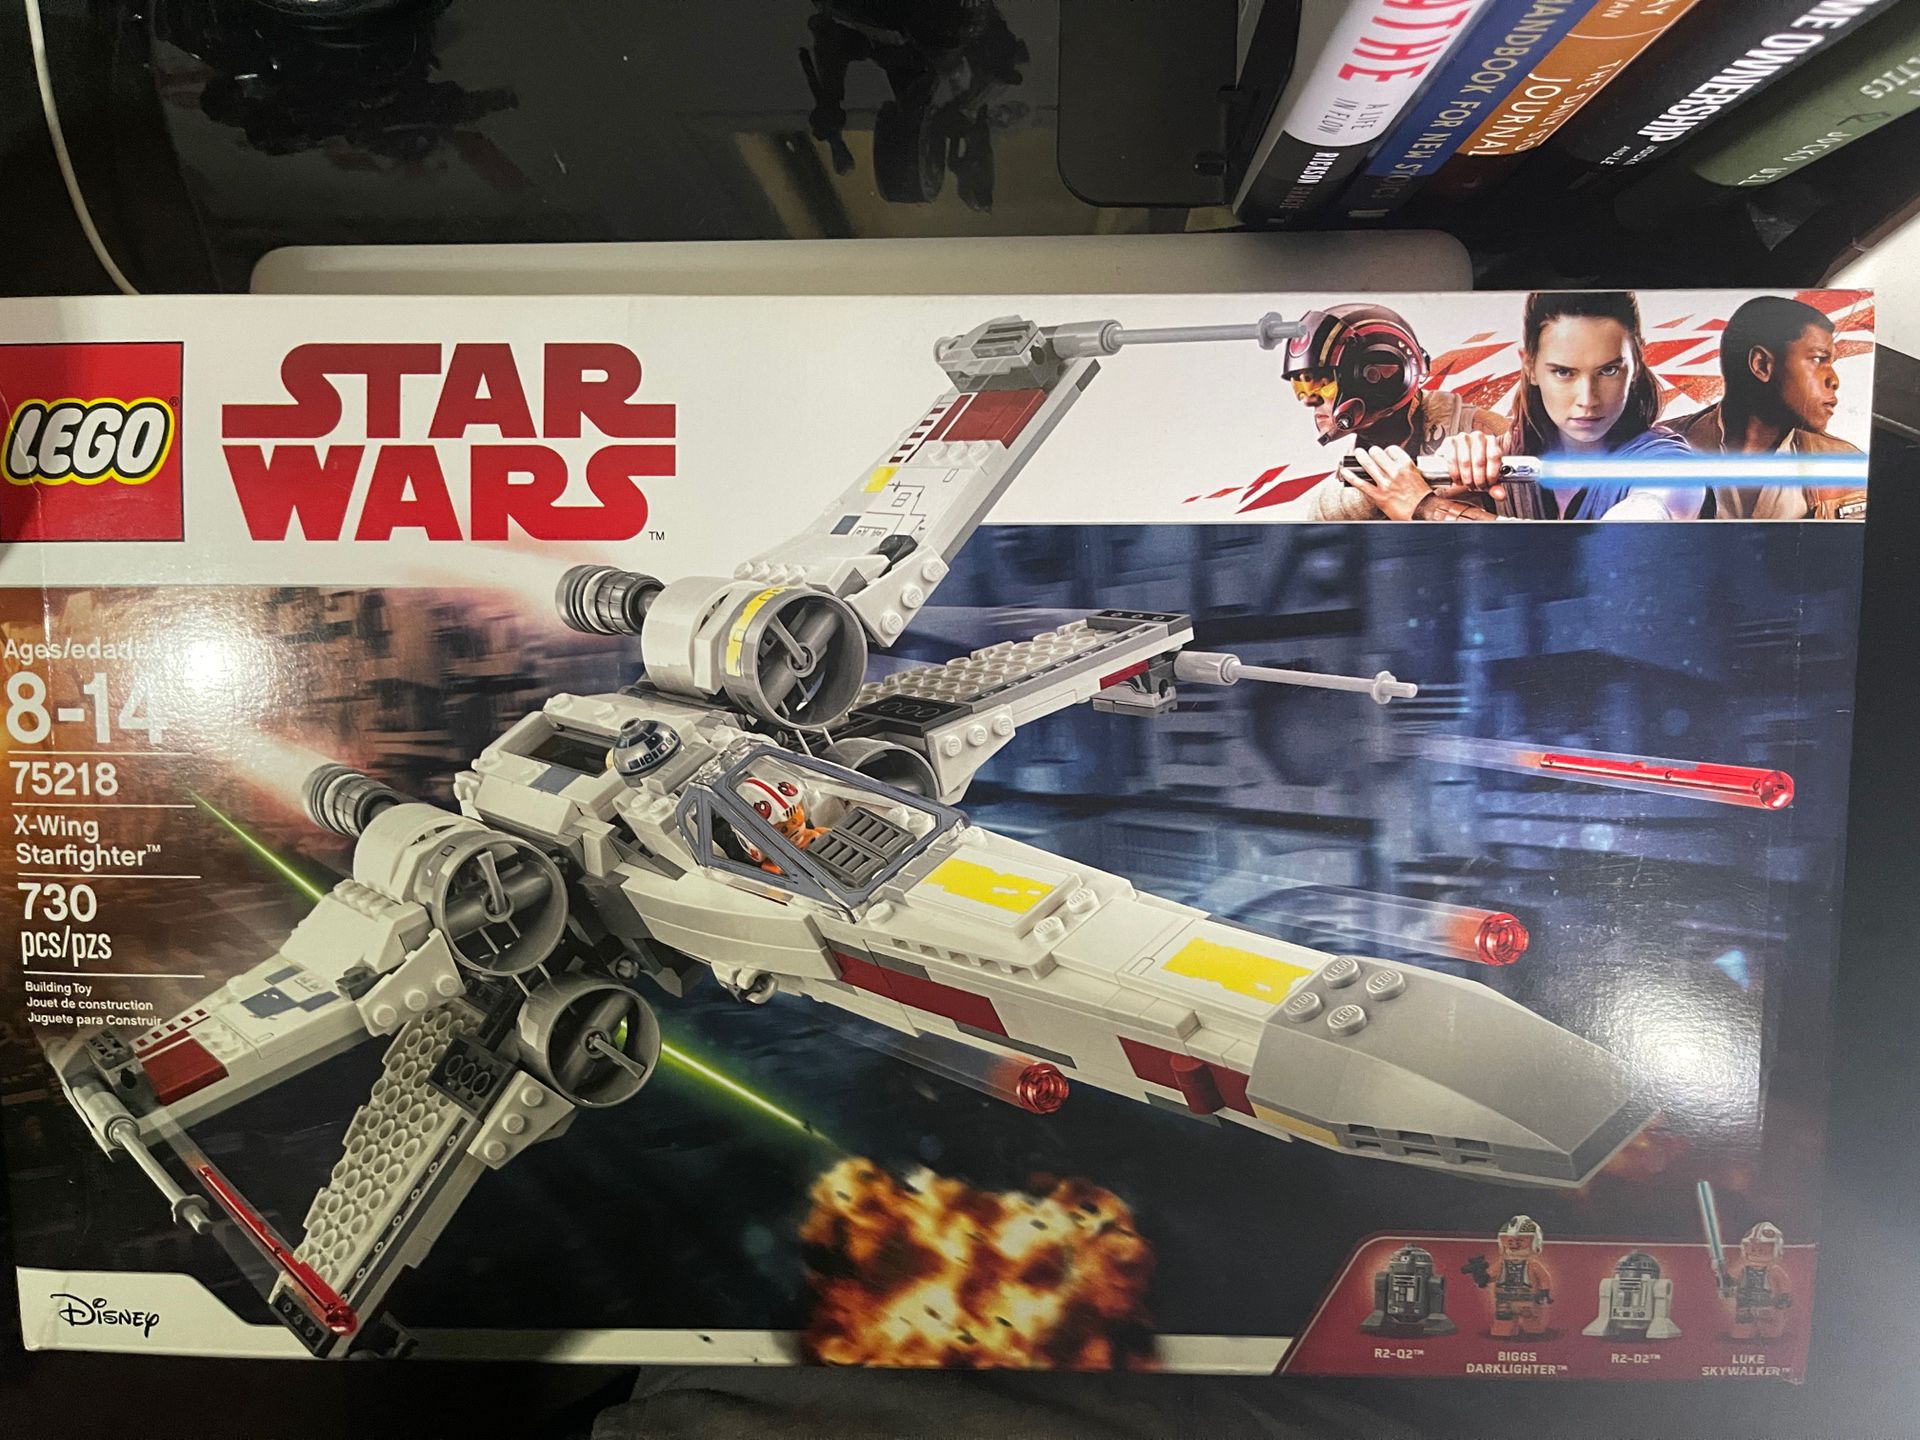 Lego Star Wars X-Wing 75218 New Sealed Box Disney The Mandalorian Sale in West Covina, OfferUp